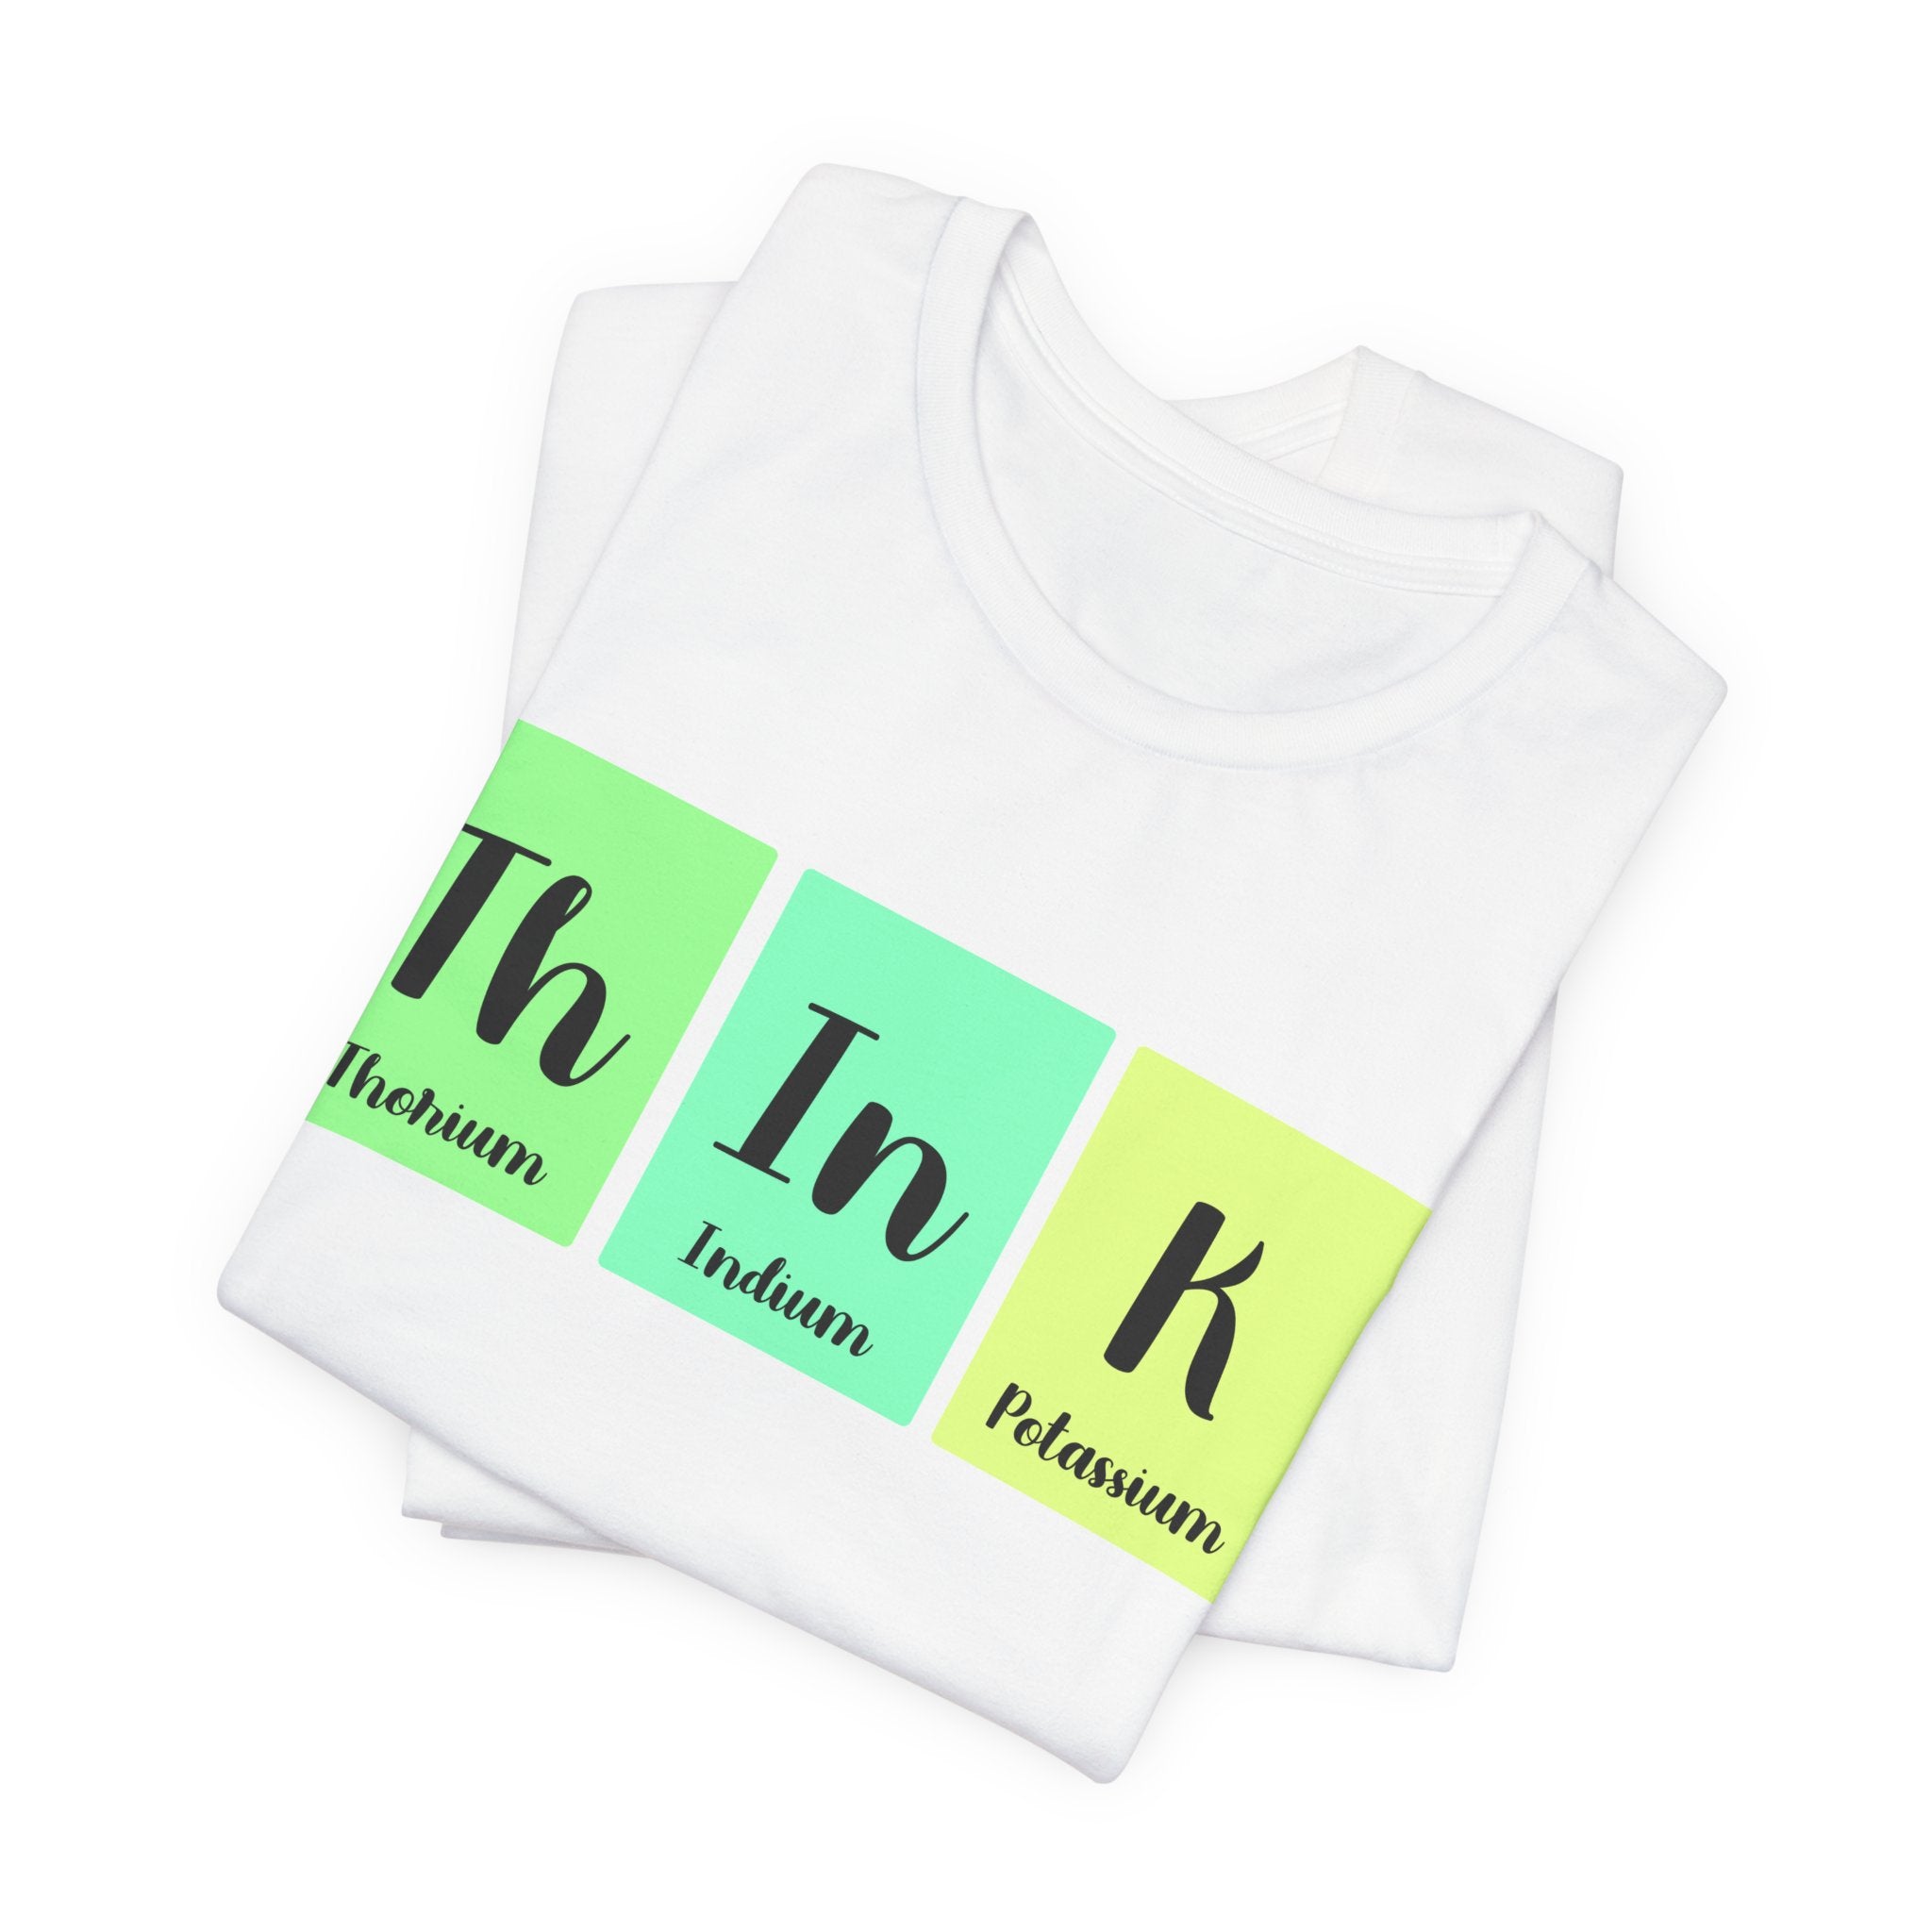 White unisex jersey tee with a graphic of colorful blocks containing the periodic table elements for Th, In, and K, spelling "think" - Th-In-k tee